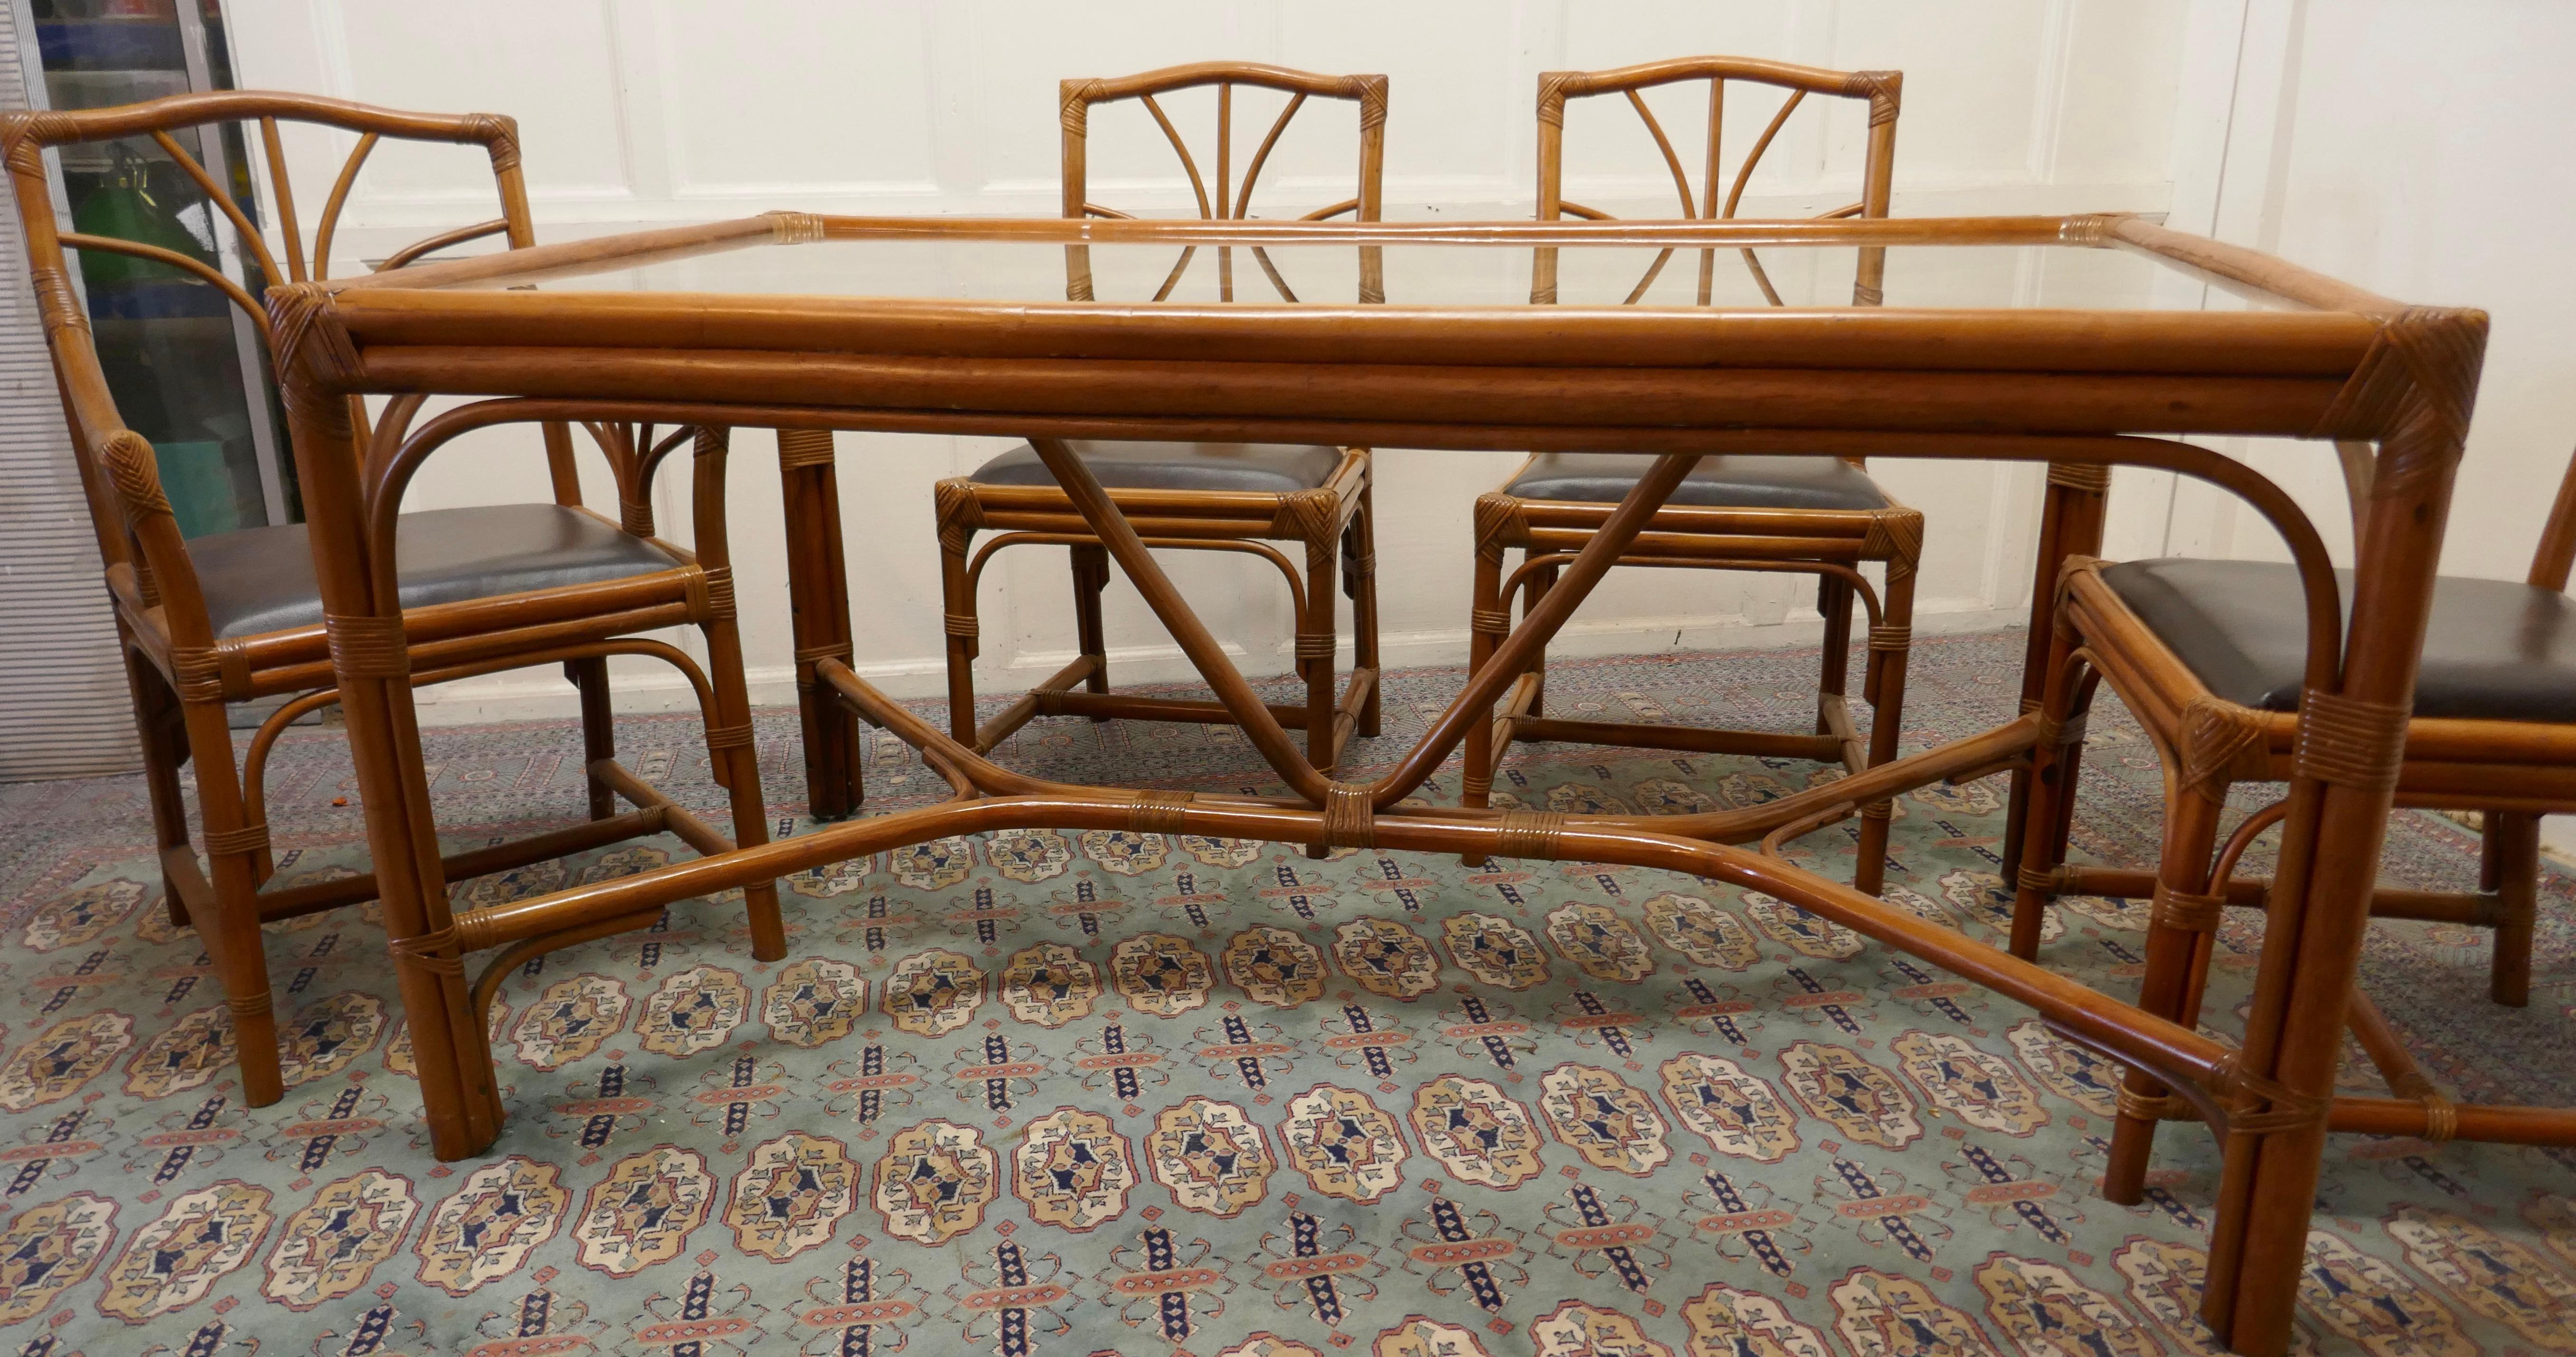 Regency Style Simulated Bamboo Dining Table and 6 Chairs    In Good Condition For Sale In Chillerton, Isle of Wight